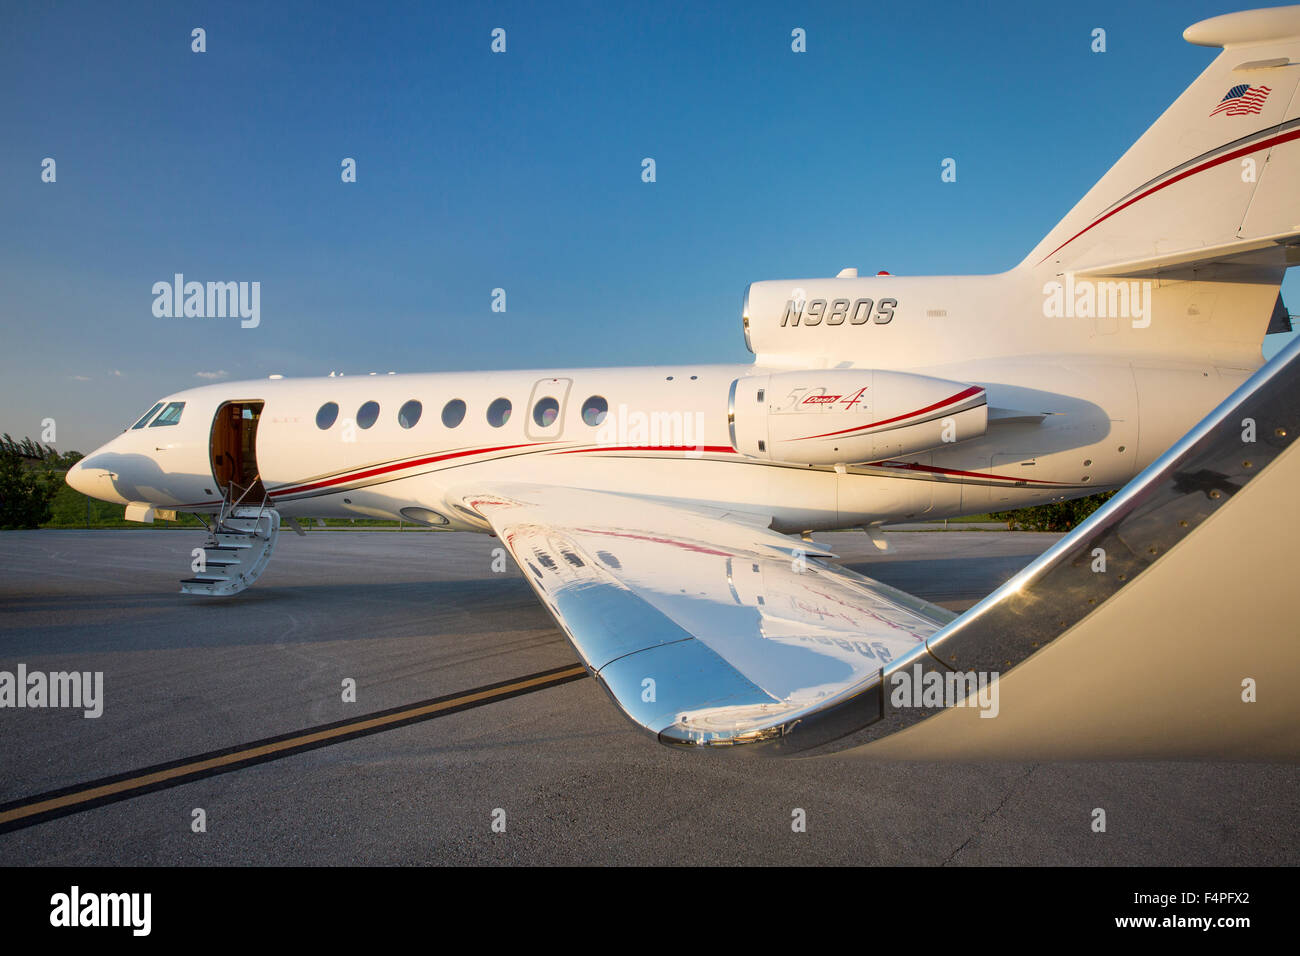 Dassault Falcon 50 jet aircraft parked in Naples, Florida, USA Stock Photo